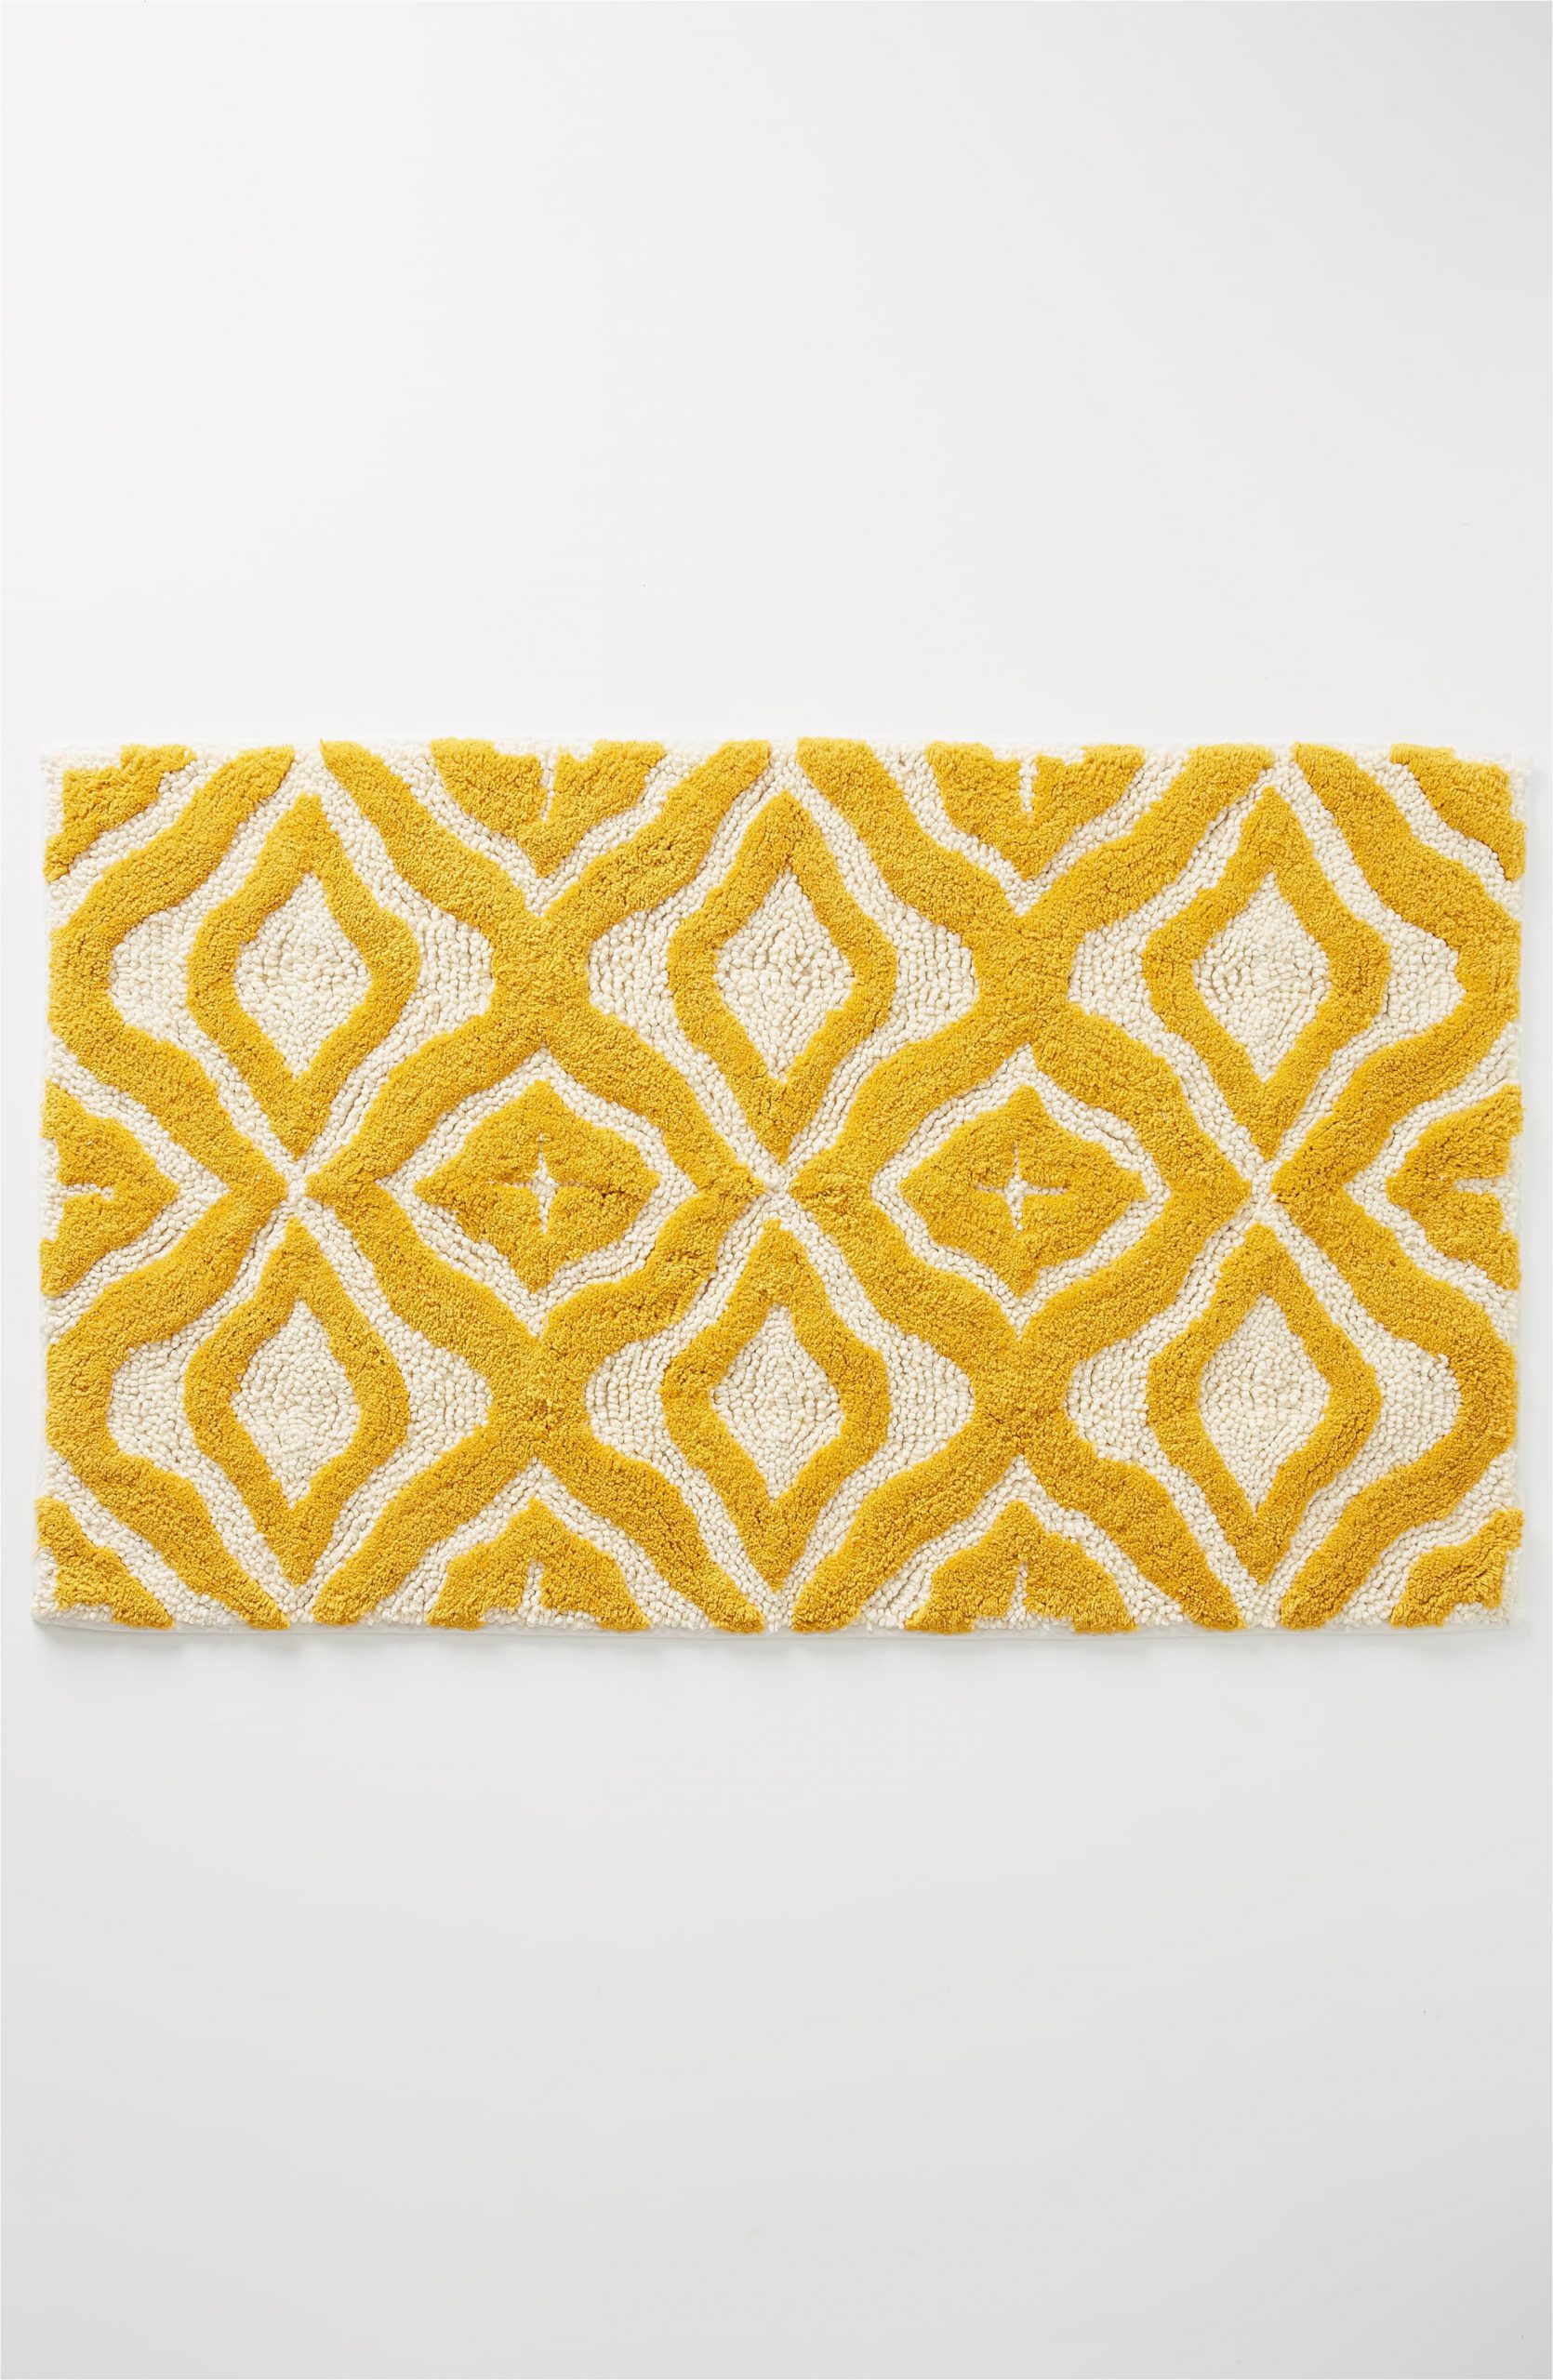 Large Yellow Bathroom Rugs Anthropologie Cabello Geo Tufted Bath Mat Size